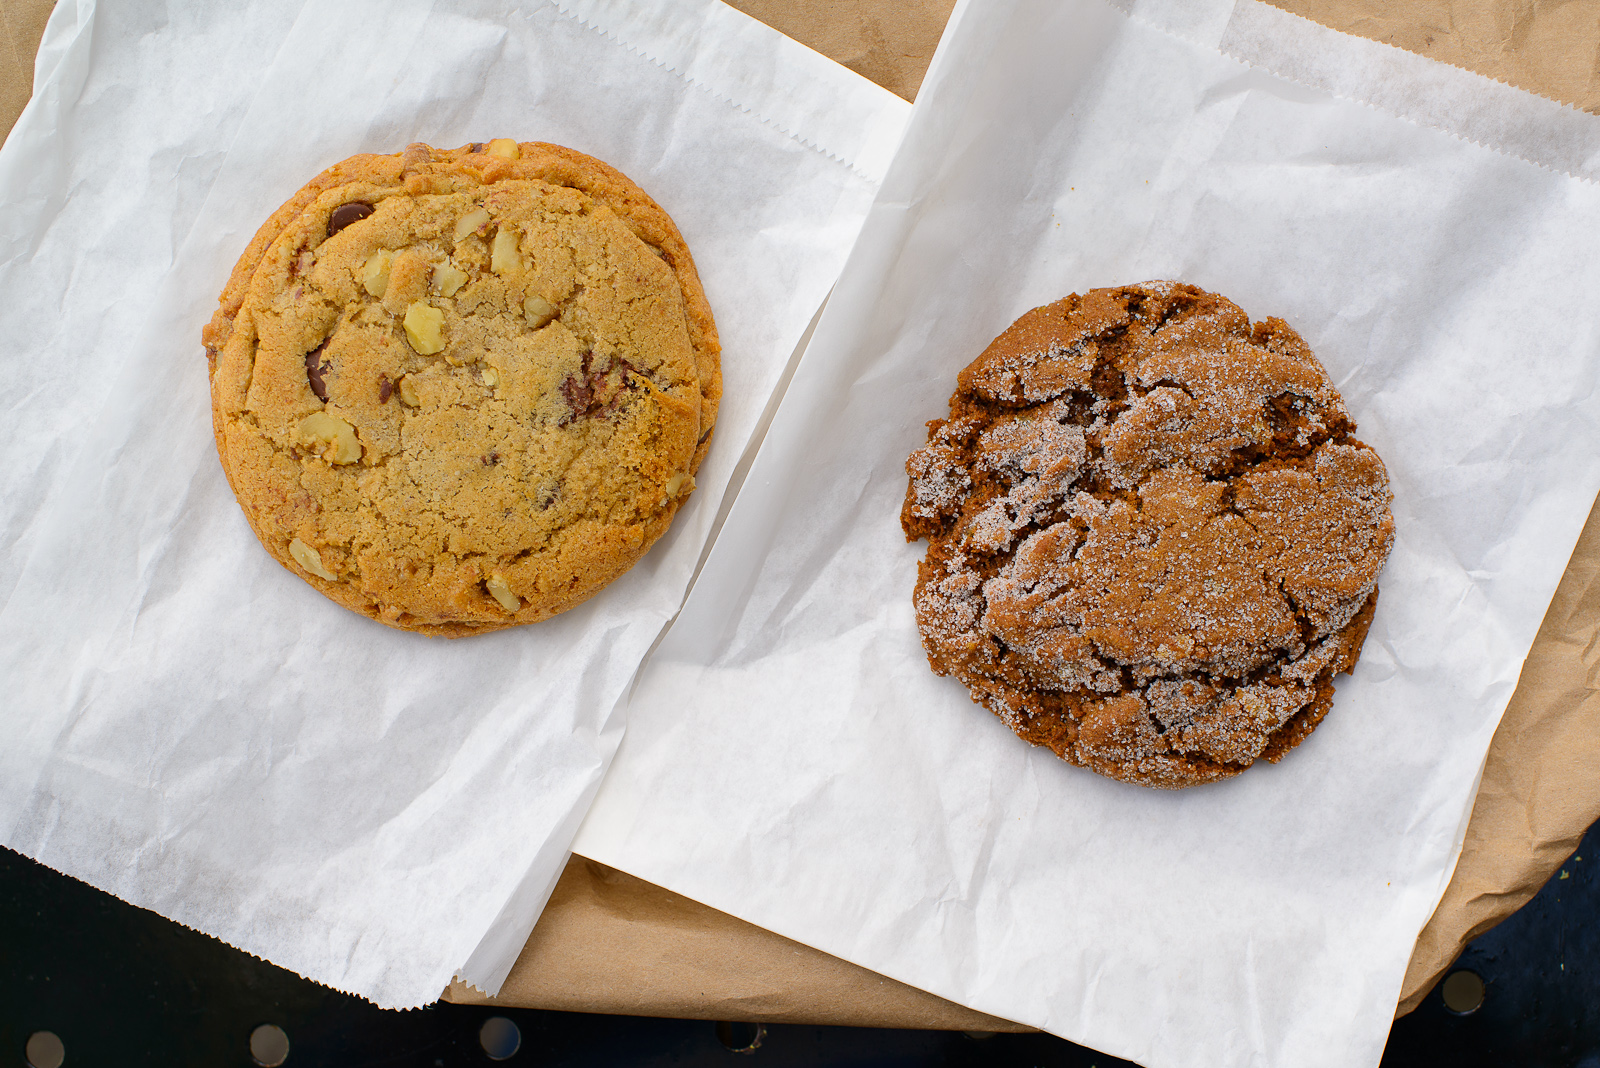 Chocolate chip and ginger cookies ($1.50 each)